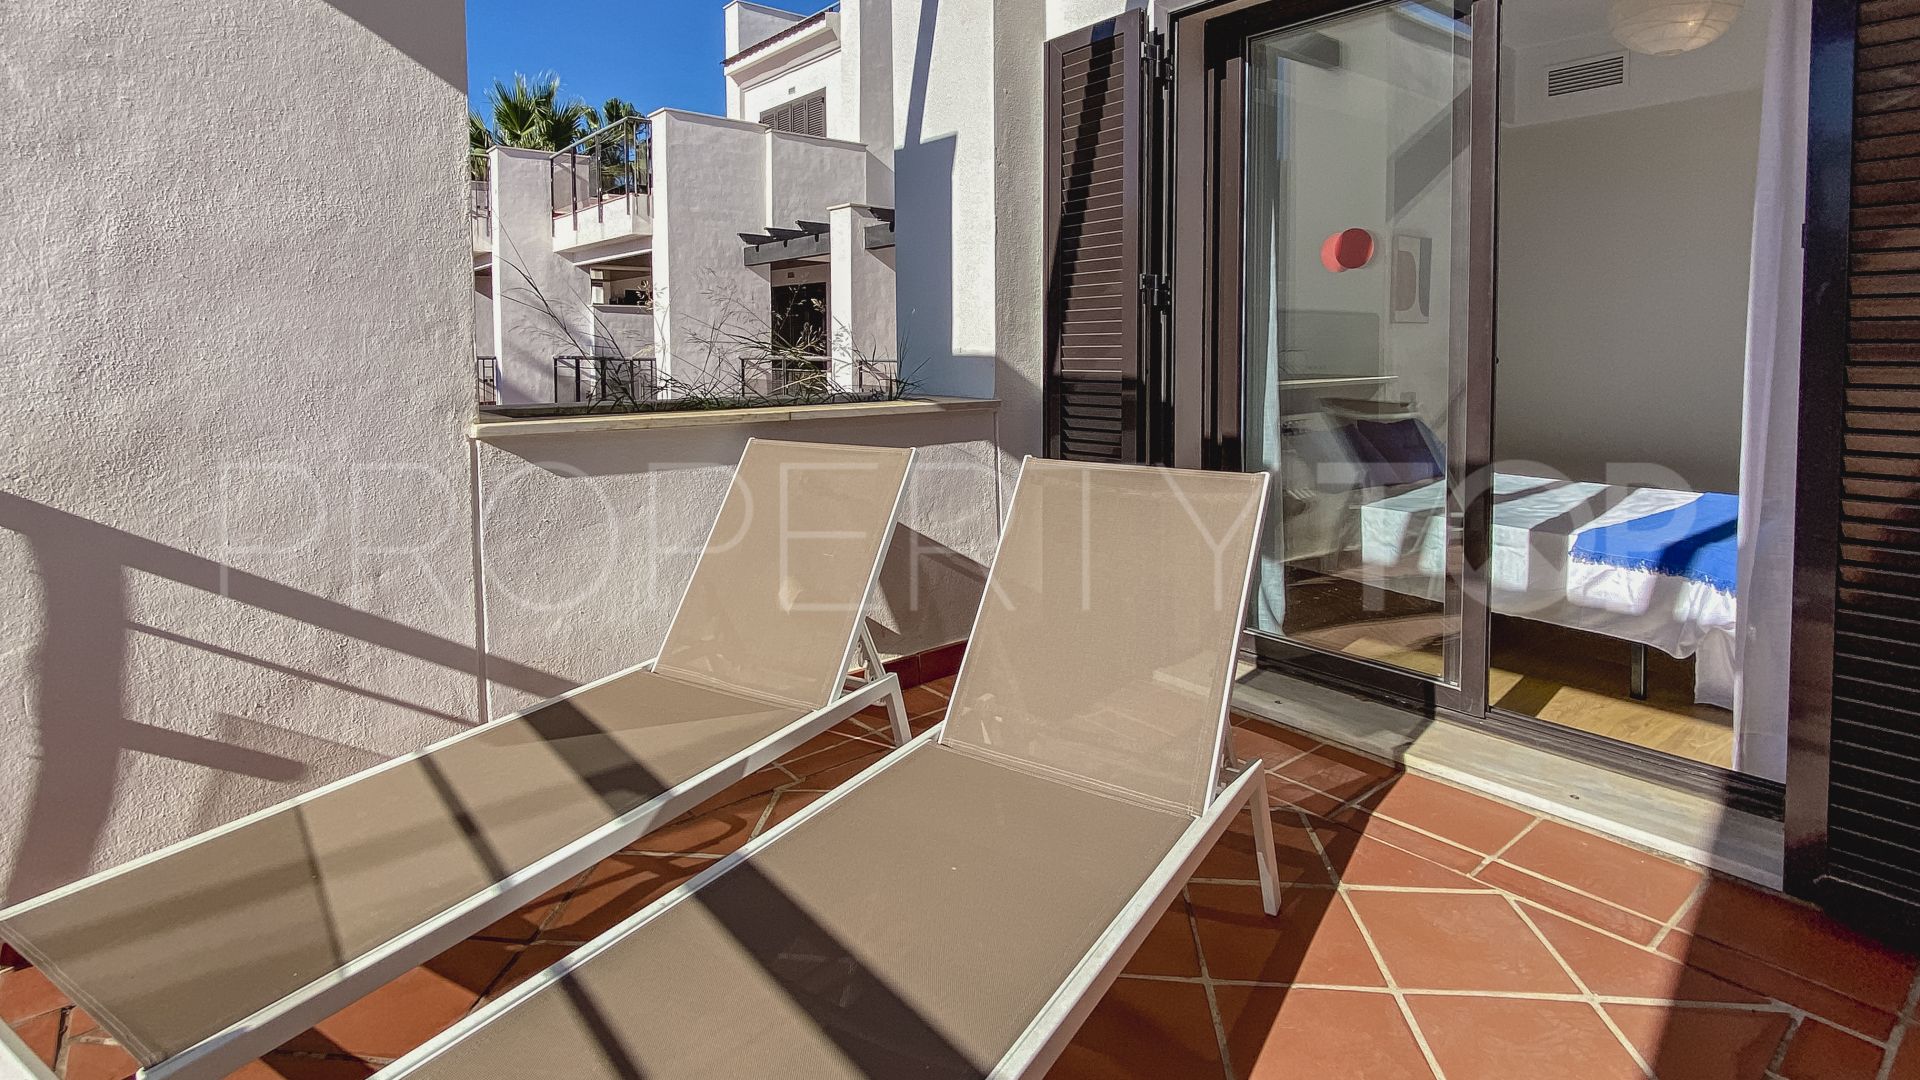 For sale apartment in Casares del Mar with 1 bedroom